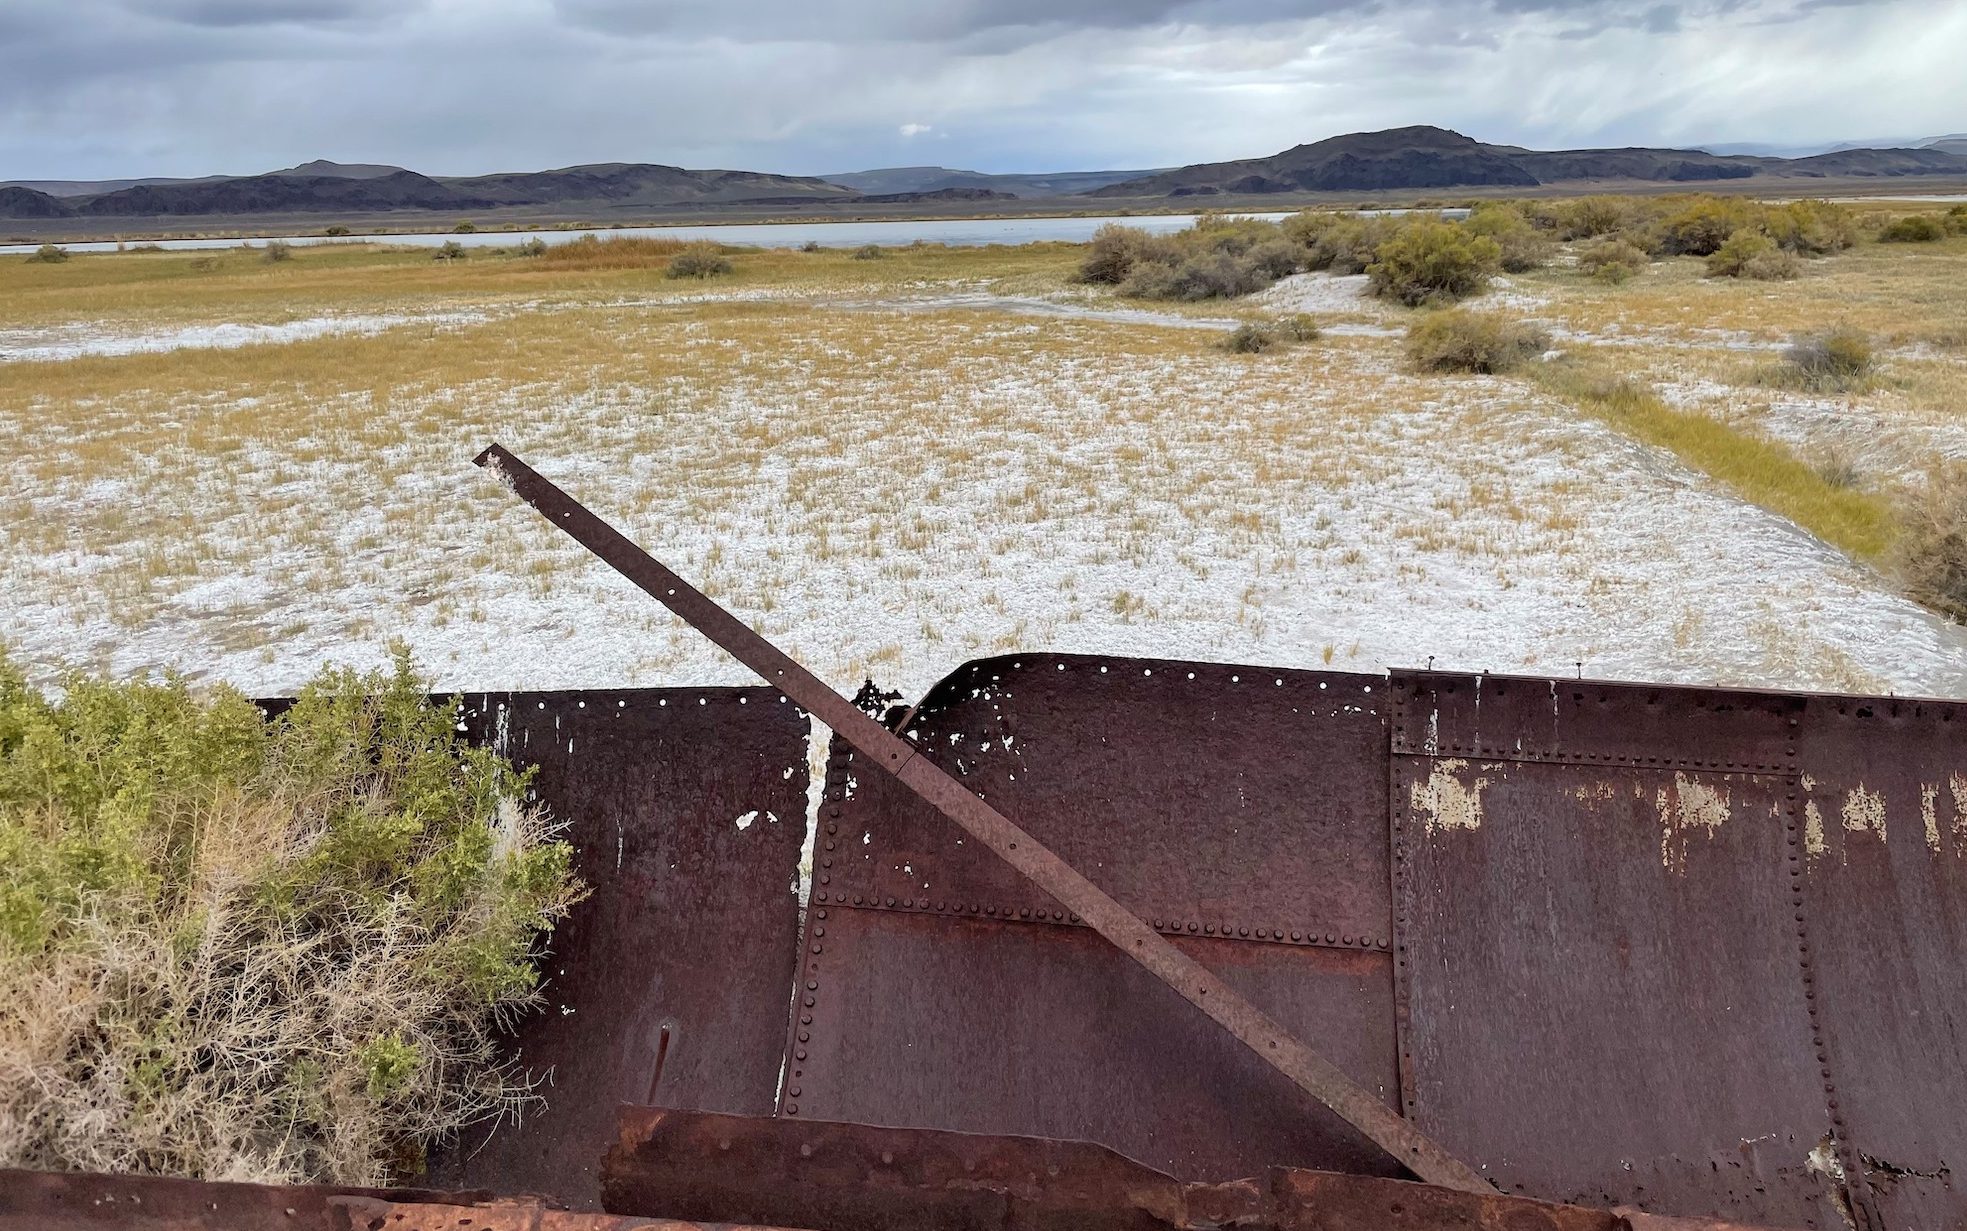 Salt flat and old rusted machinery